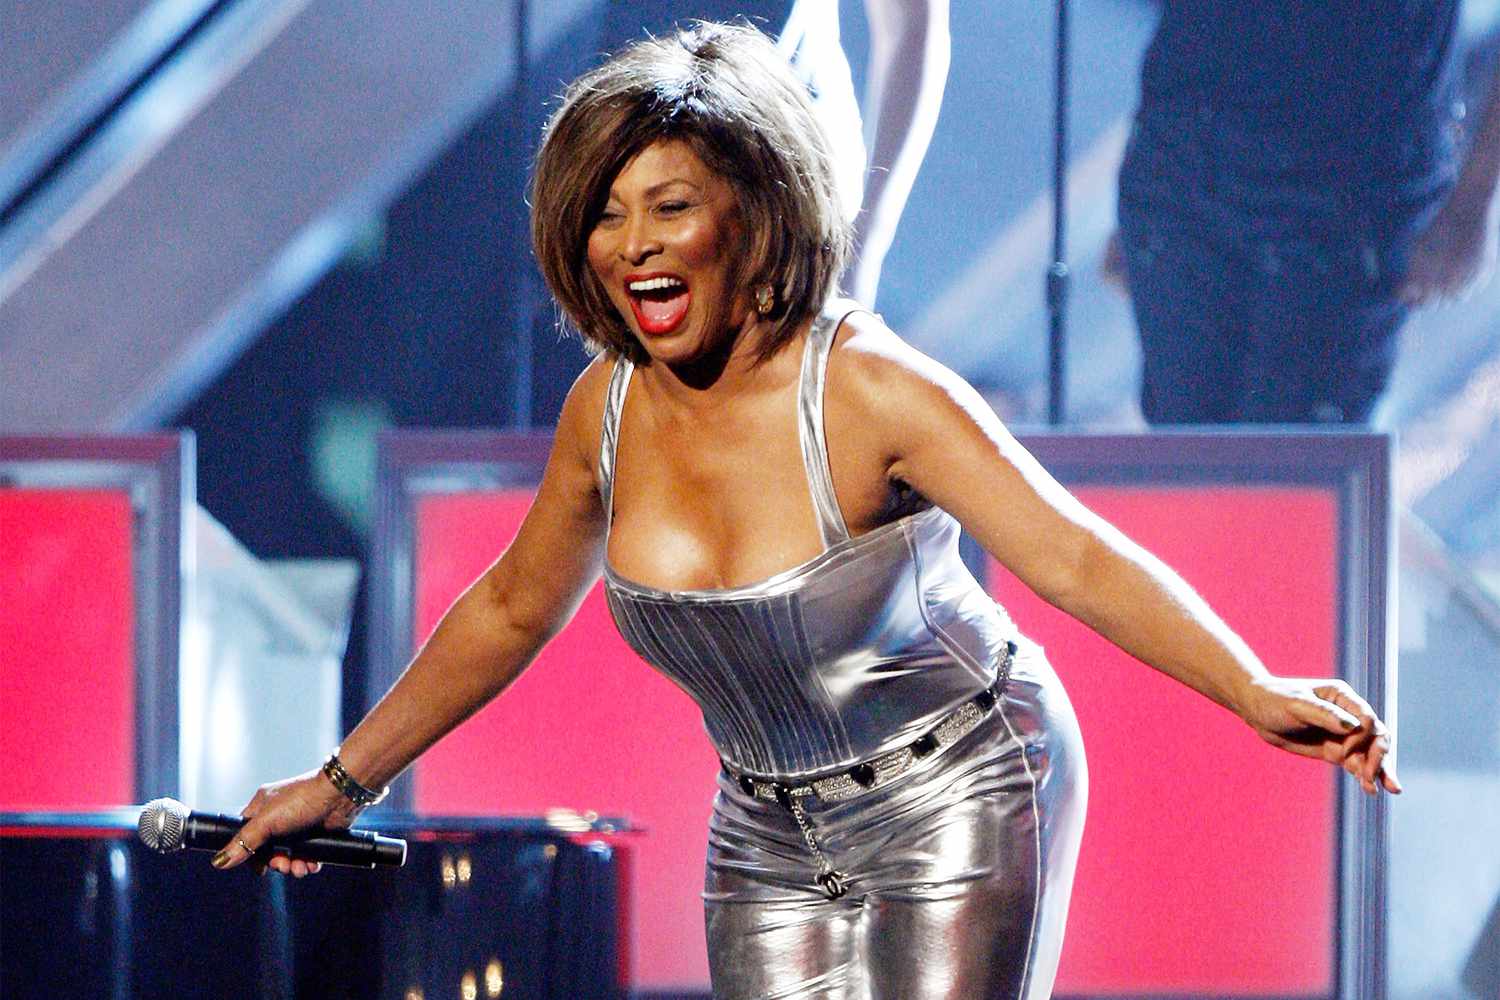 LOS ANGELES, CA - FEBRUARY 10: Singer Tina Turner performs onstage during the 50th annual Grammy awards held at the Staples Center on February 10, 2008 in Los Angeles, California. (Photo by Kevin Winter/Getty Images)